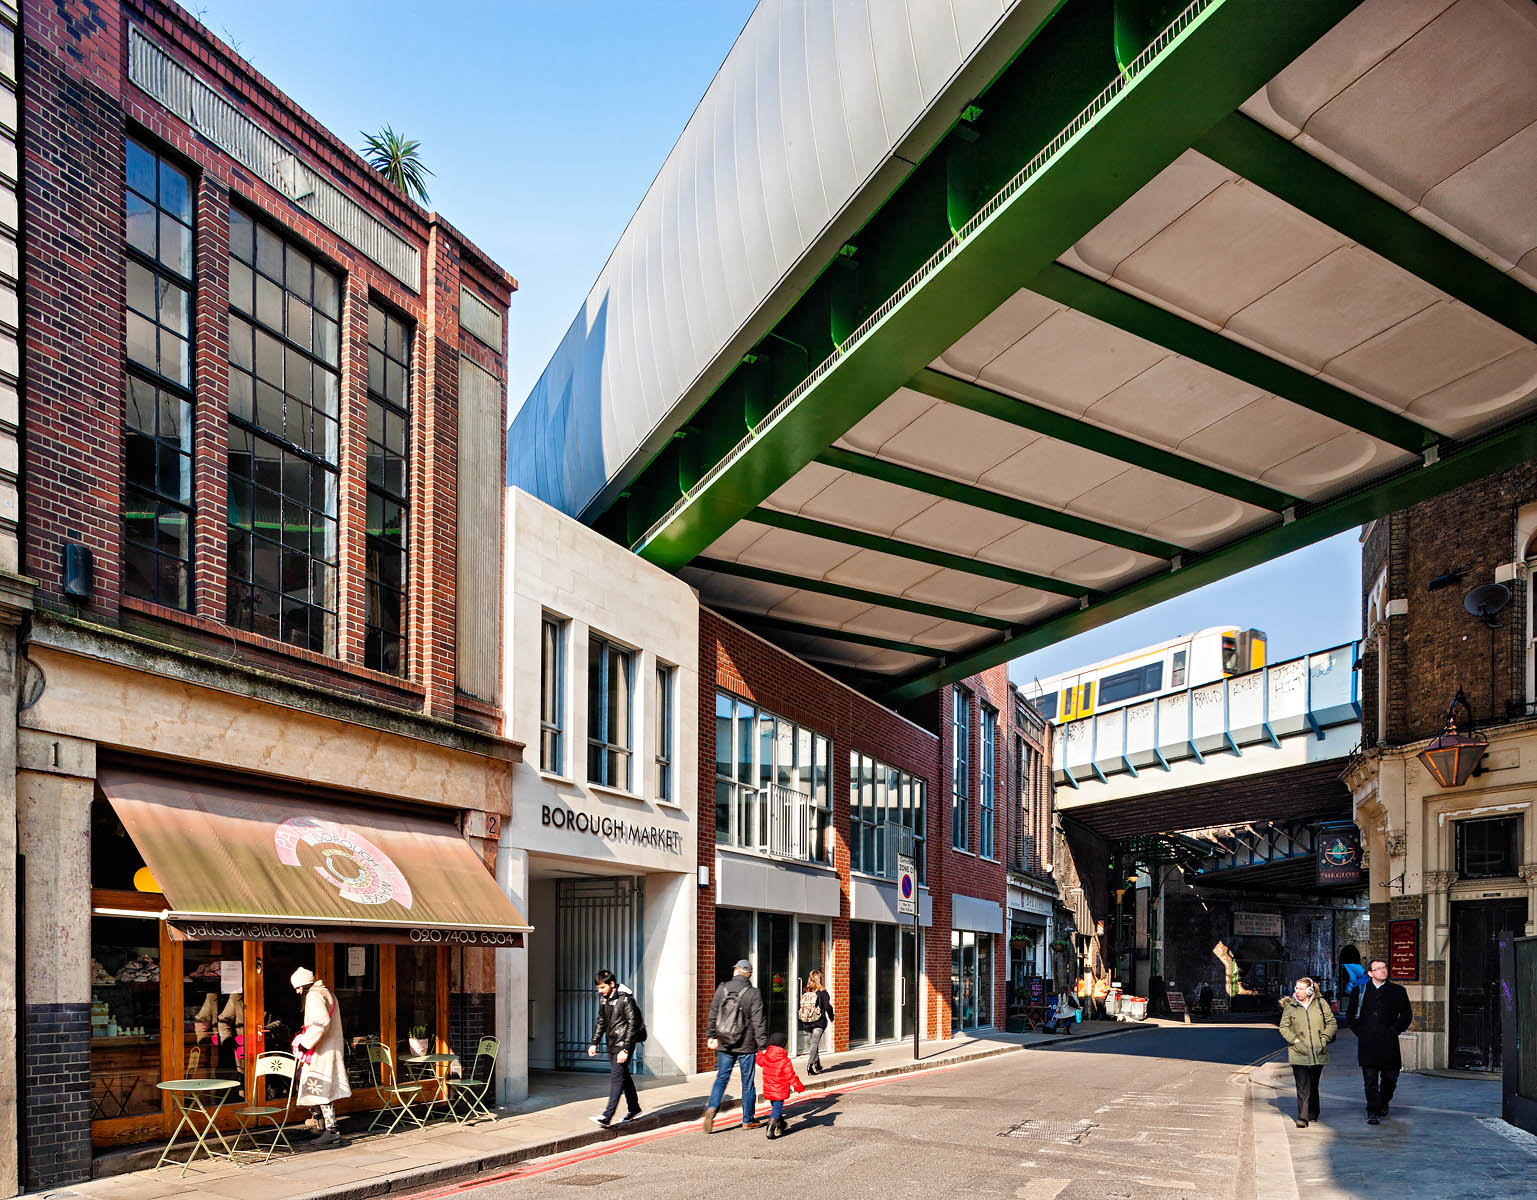 Highly complex remodelling of historic Borough Market to incorporate viaduct for trains in addition to creating new retail buildings and a glazed market hall.Client / Architect: Jestico + Whiles